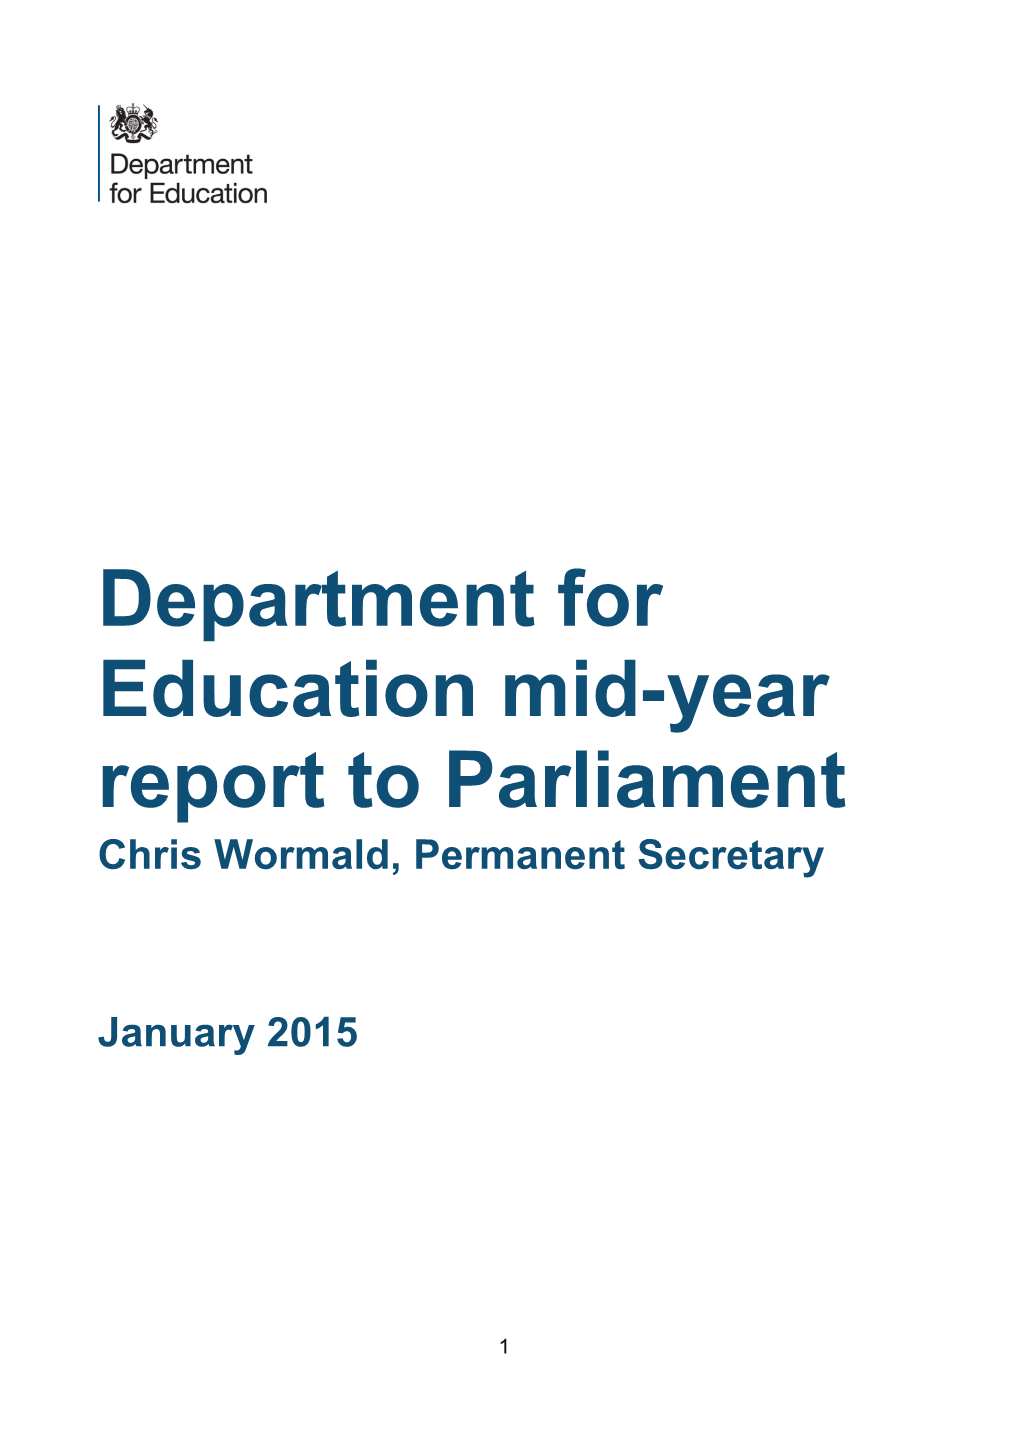 Department for Education Mid-Year Report to Parliament Chris Wormald, Permanent Secretary